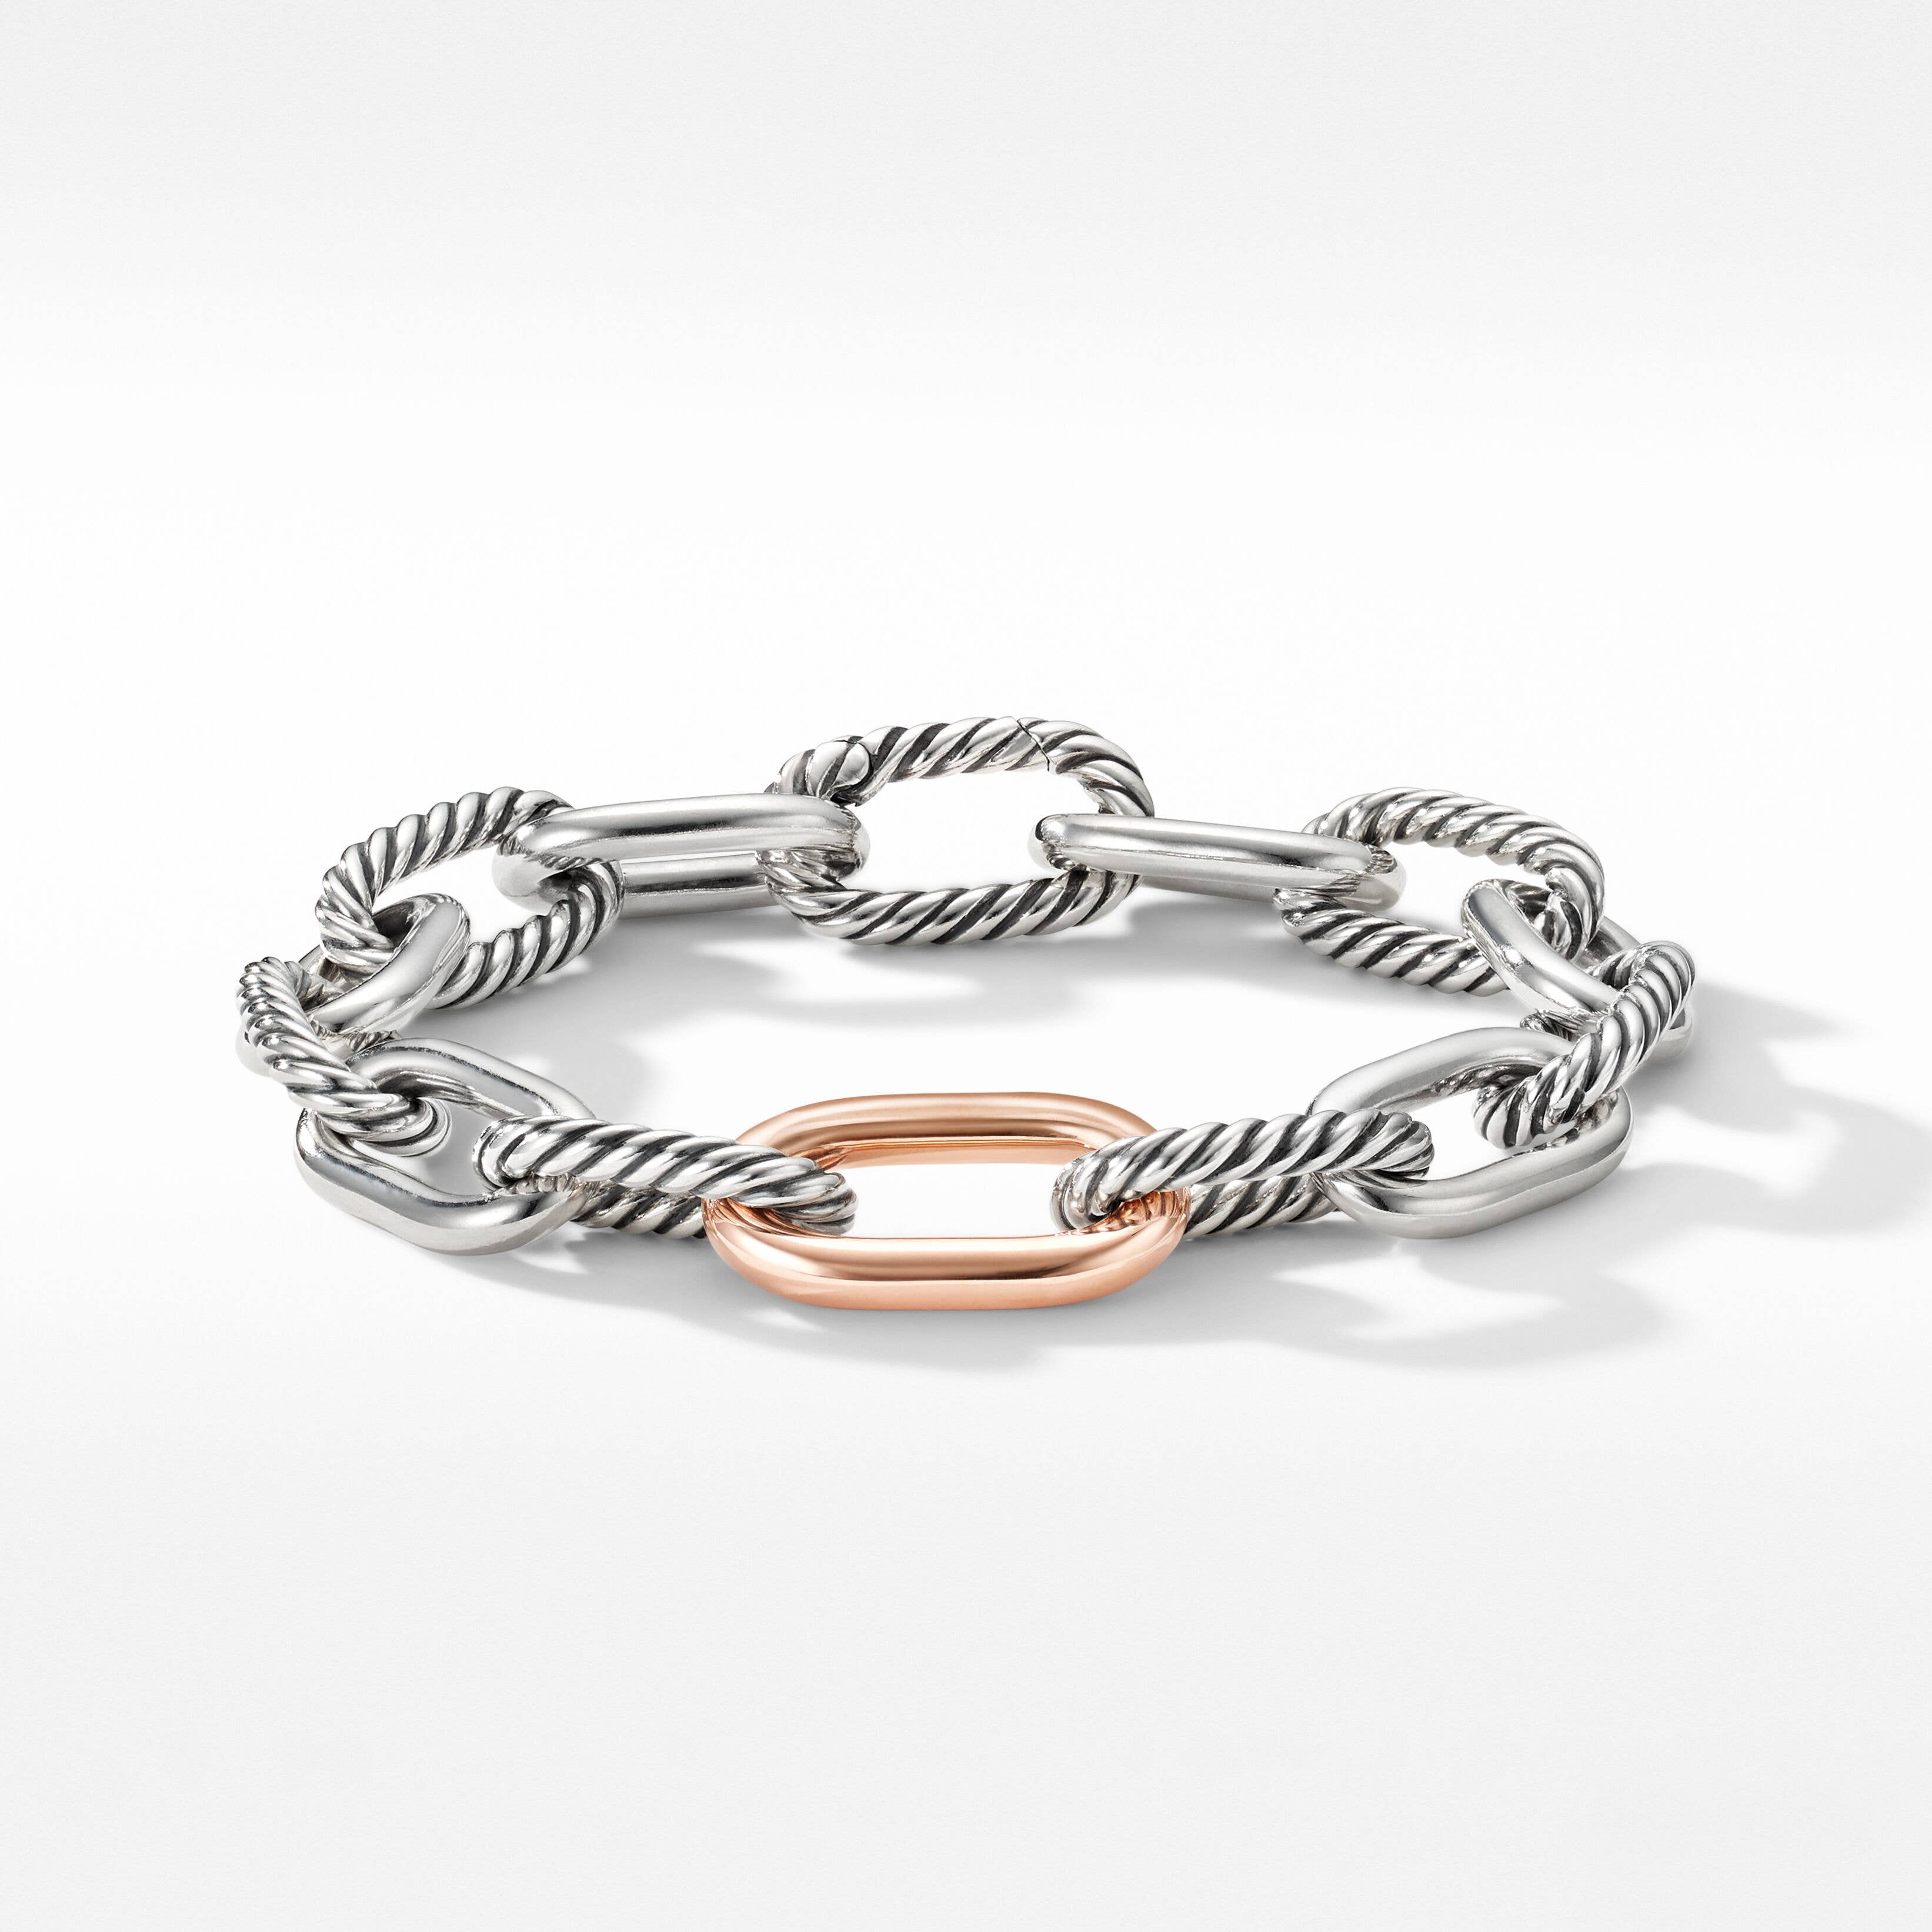 DY Madison® Chain Bracelet in Sterling Silver with 18K Rose Gold